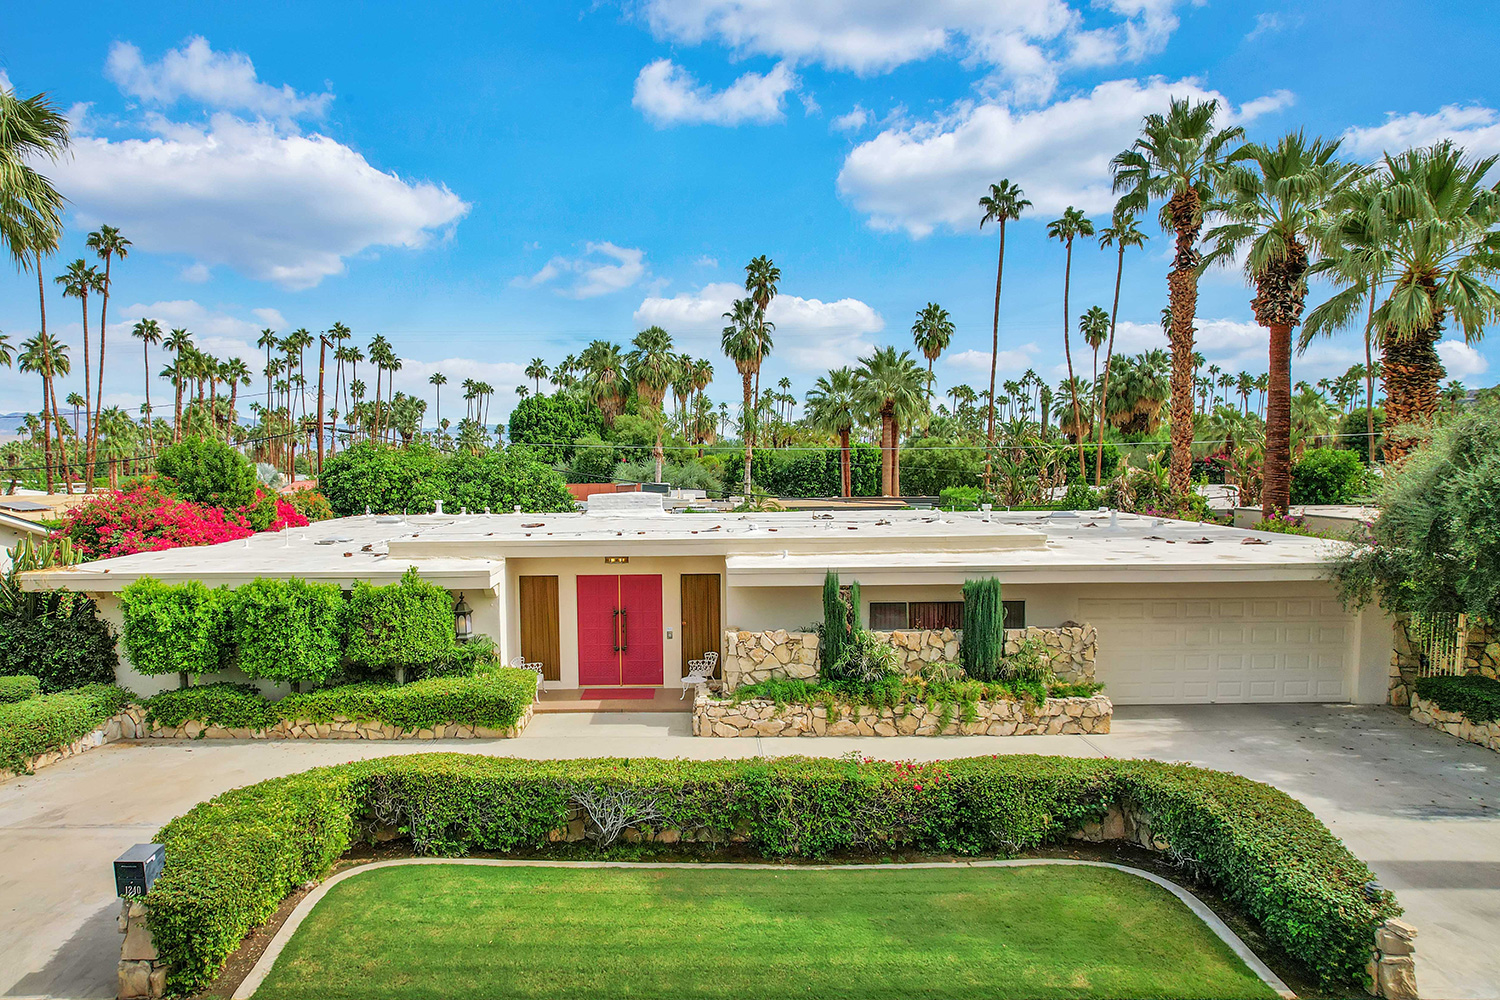 Perfectly preserved 1960s Palm Springs home for sale goes viral